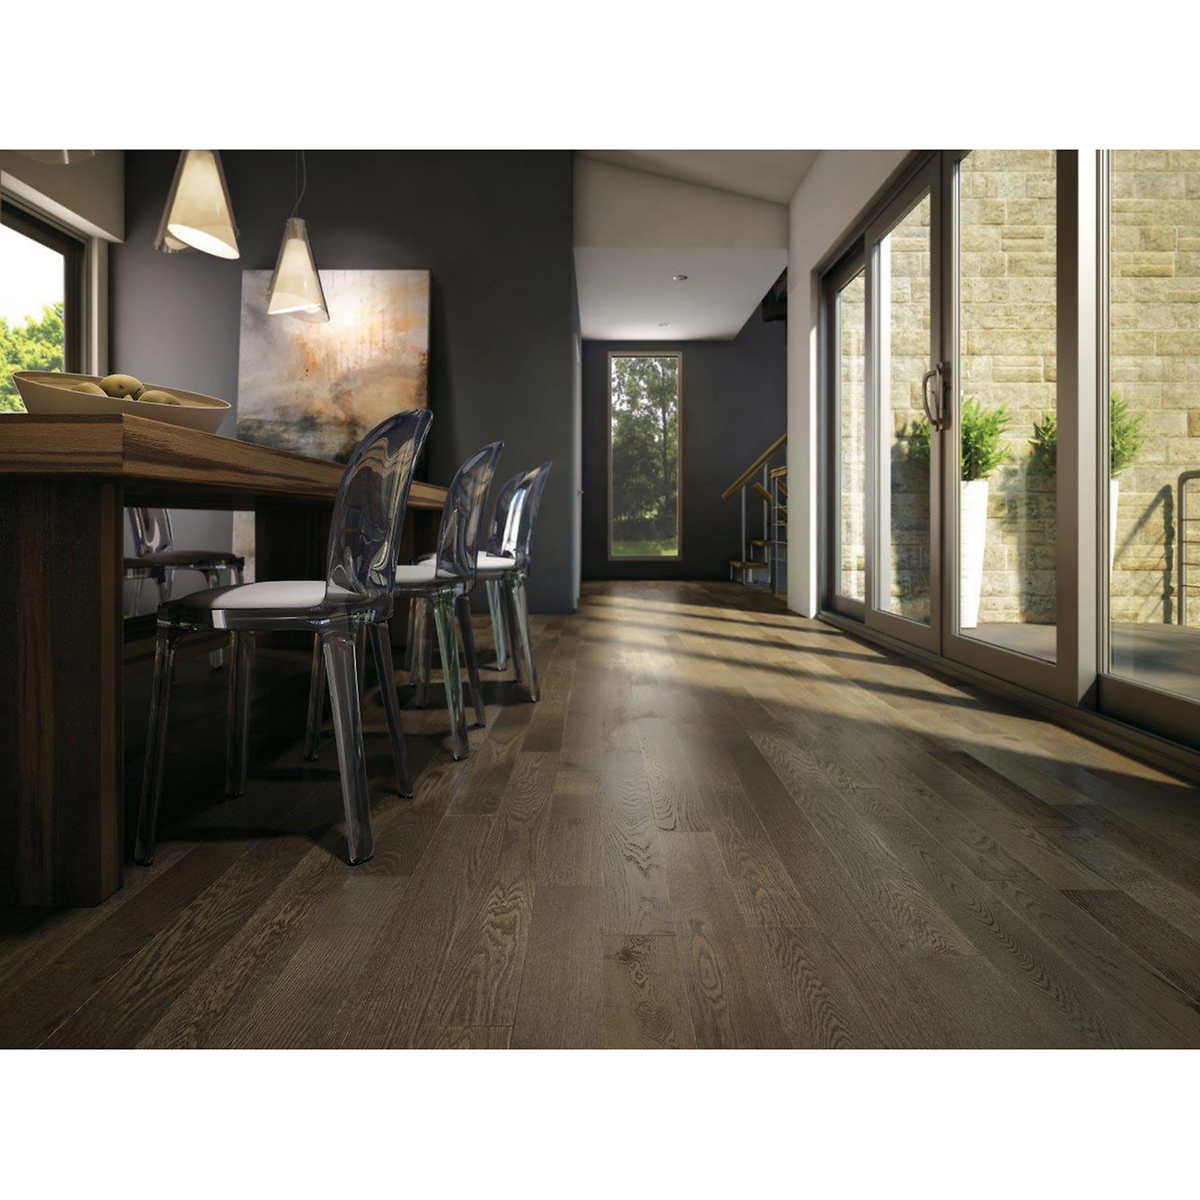 Kairos Brushed Oak 12 7 Cm 5 In Engineered Wood Flooring With Underlayment Included Costco